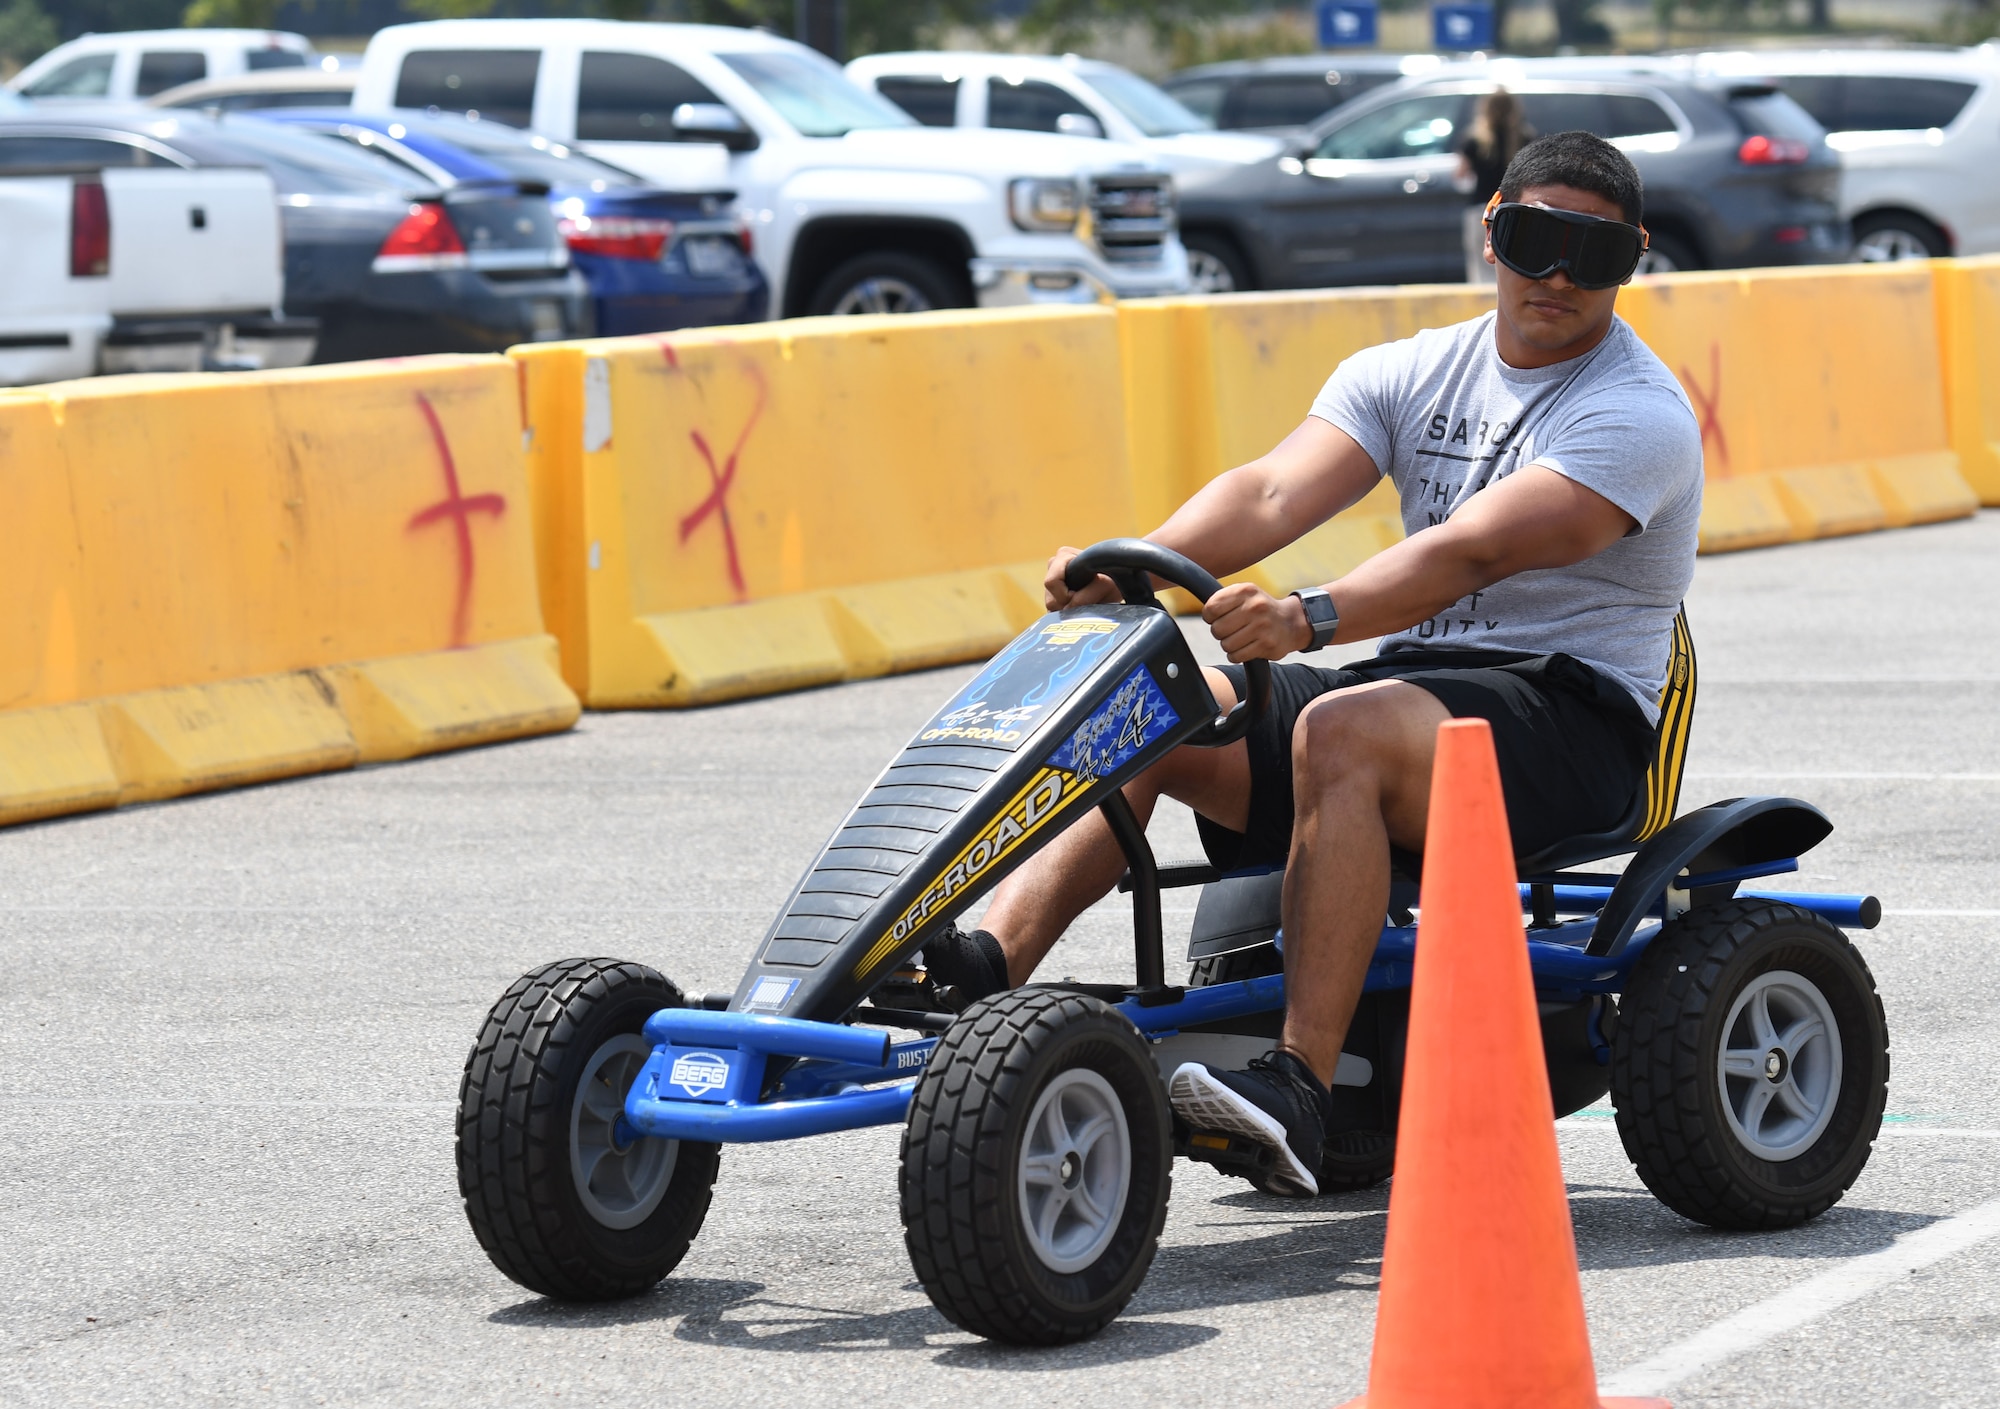 U.S. Air Force Senior Airman Bonilla Marcos, 81st Training Group training evaluator, drives a cart while wearing drunk goggles during the 81st Security Forces fun day at the base exchange at Keesler Air Force Base, Mississippi, May 18, 2018. Fun day allowed individuals to view a military working dog demonstration, a combat arms weapons stand as well as tour 81st SFS vehicles and equipment. The event was held during National Police Week, which recognizes the service of law enforcement men and women who put their lives at risk every day. (U.S. Air Force photo by Kemberly Groue)